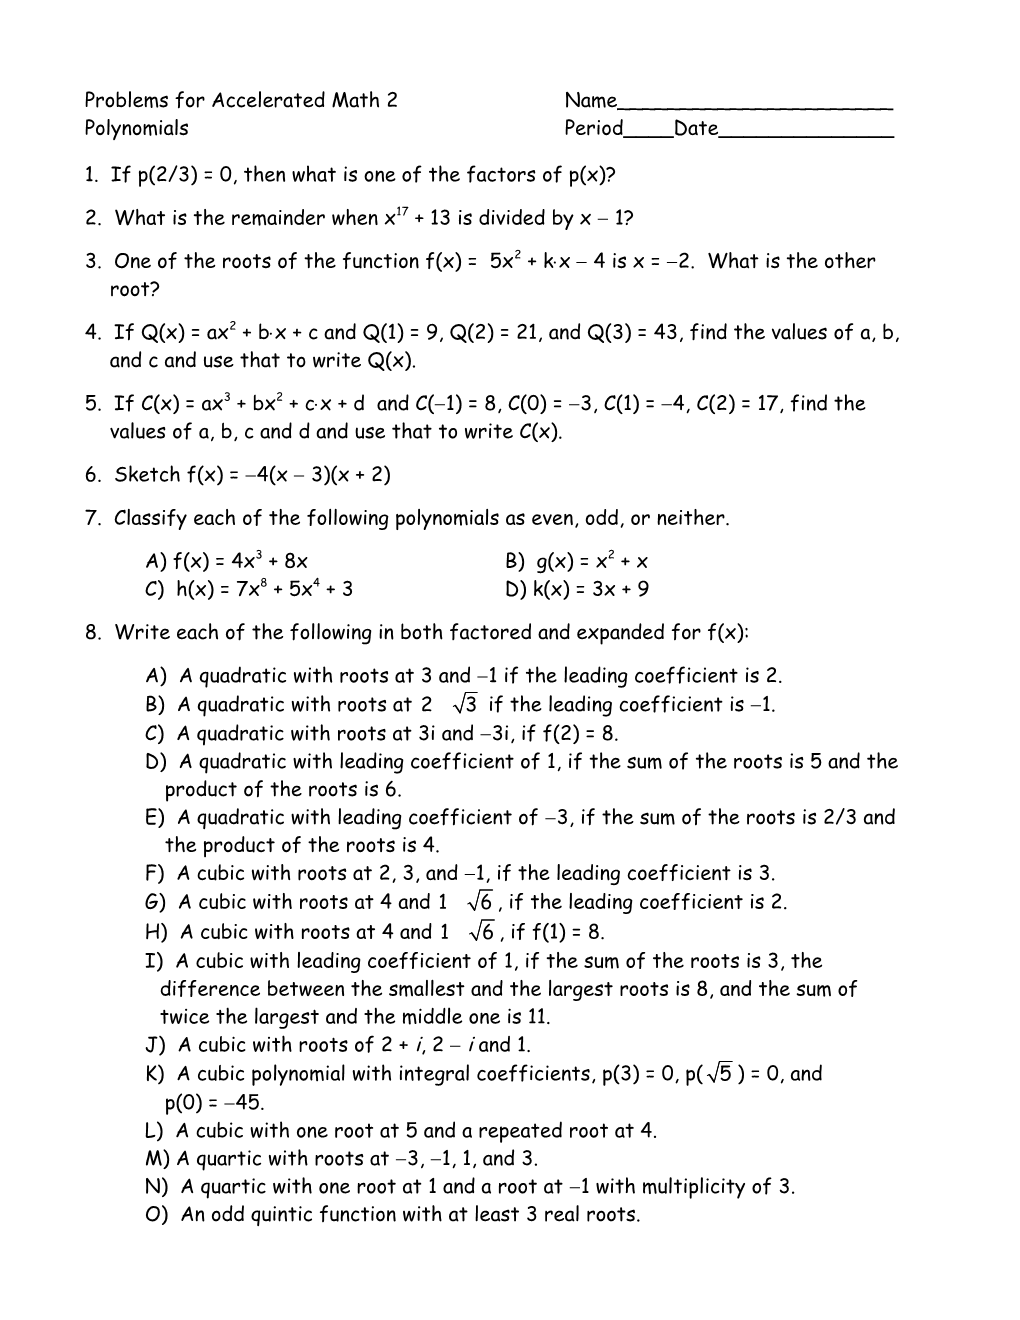 Problems for Accelerated Math 2